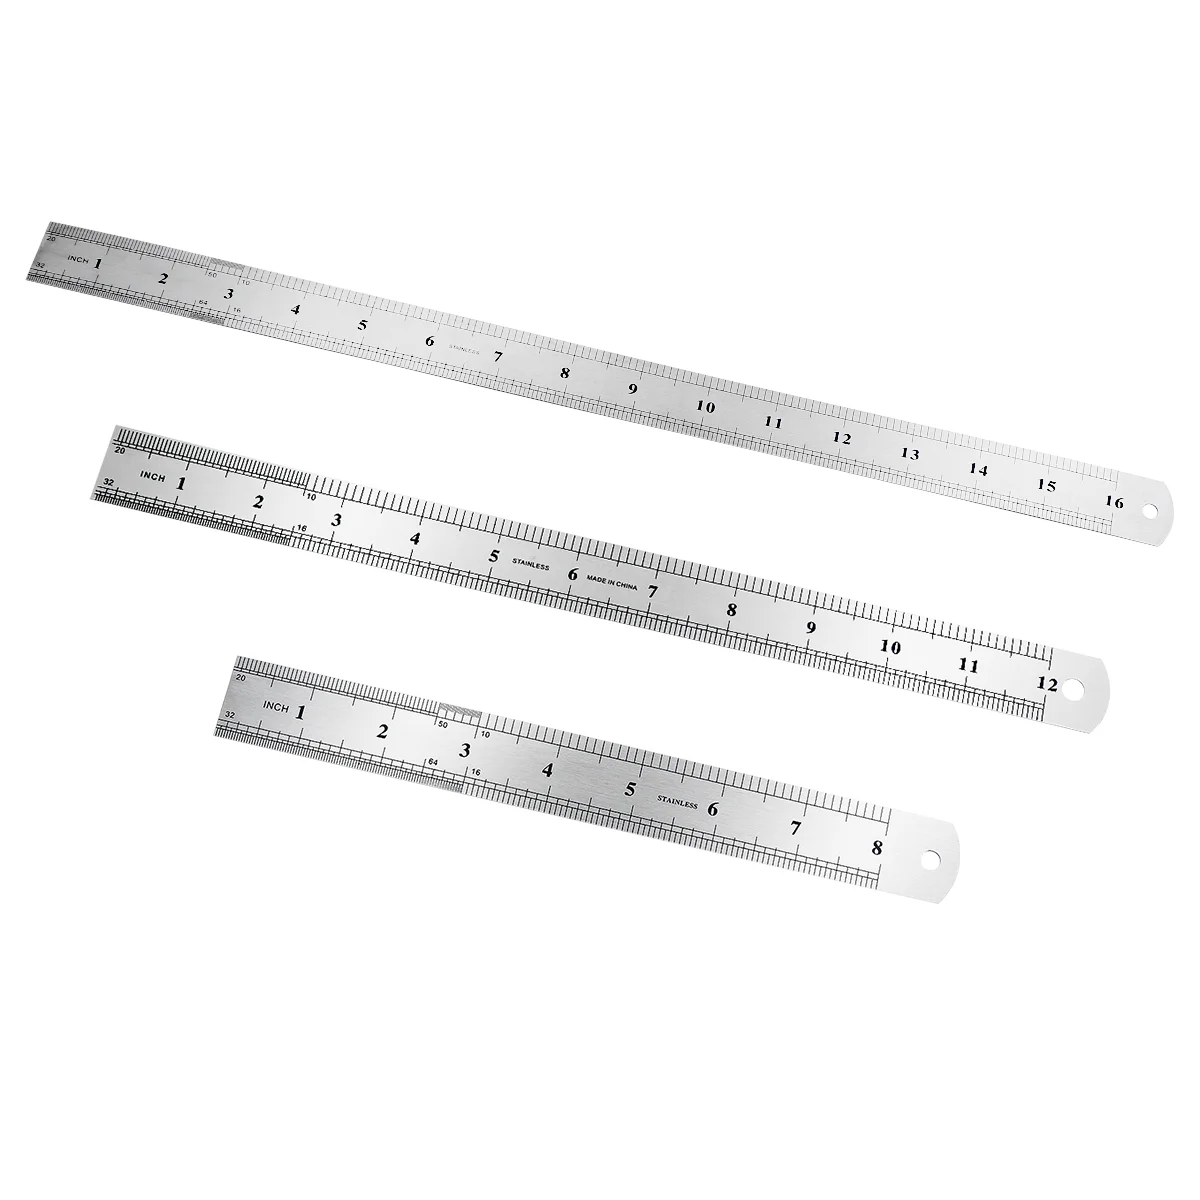 

Ruler Scale Tools Rulers Stick Draftingmetric Flexible Folding Sewing Meter Small Architect Straight Yard Inch Rule Slide Metal